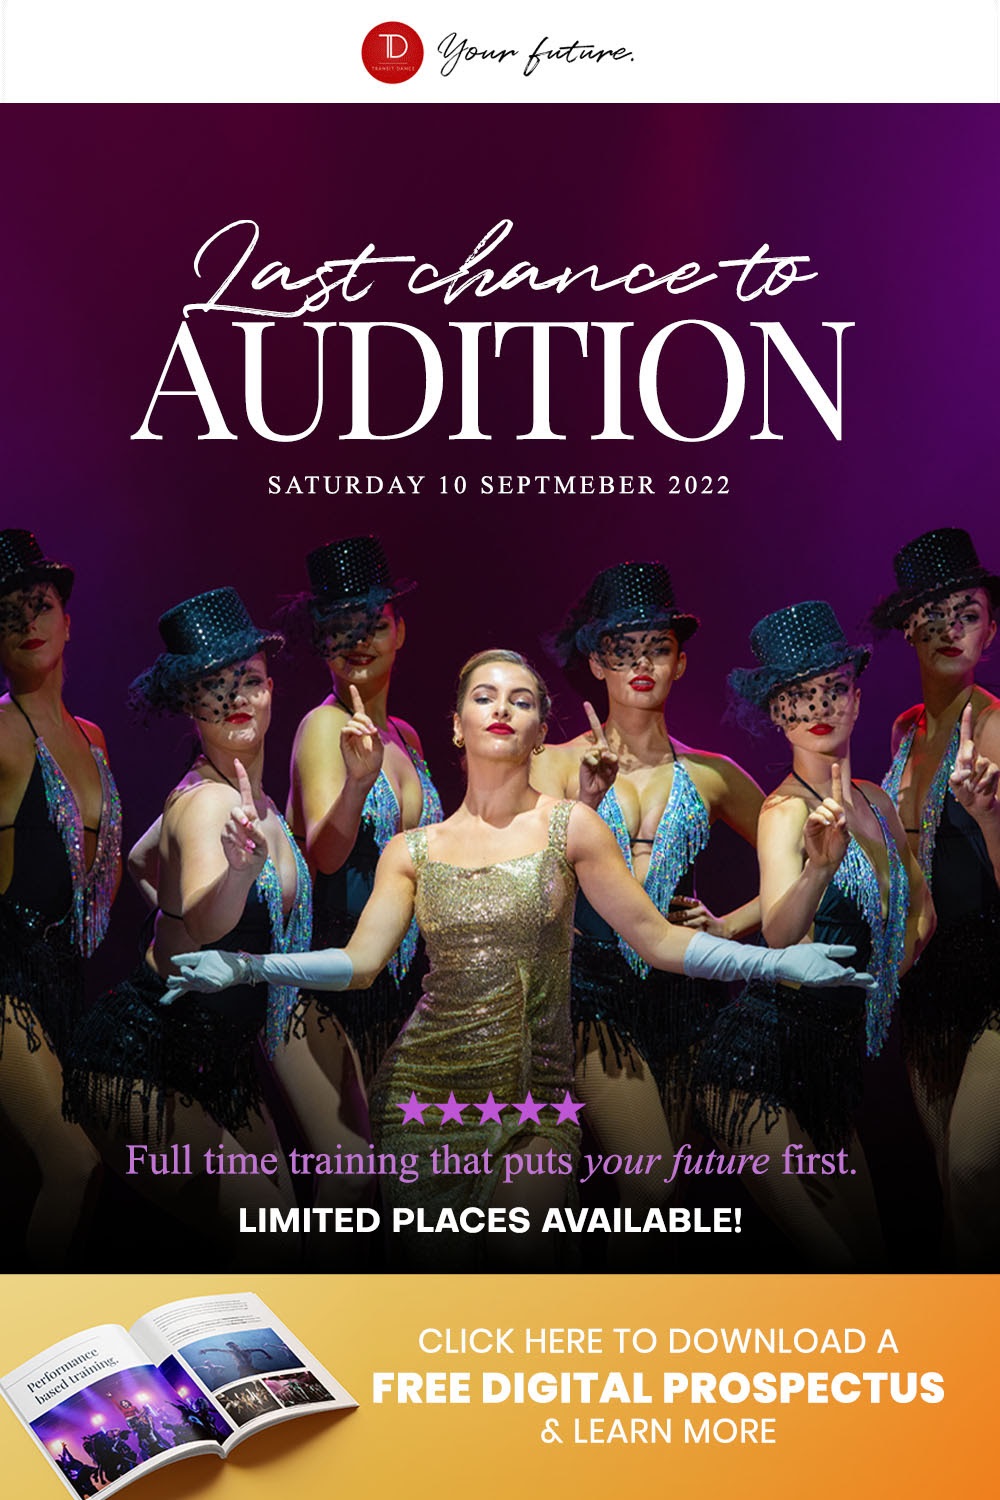 Transit Dance is Holding One Final Audition!